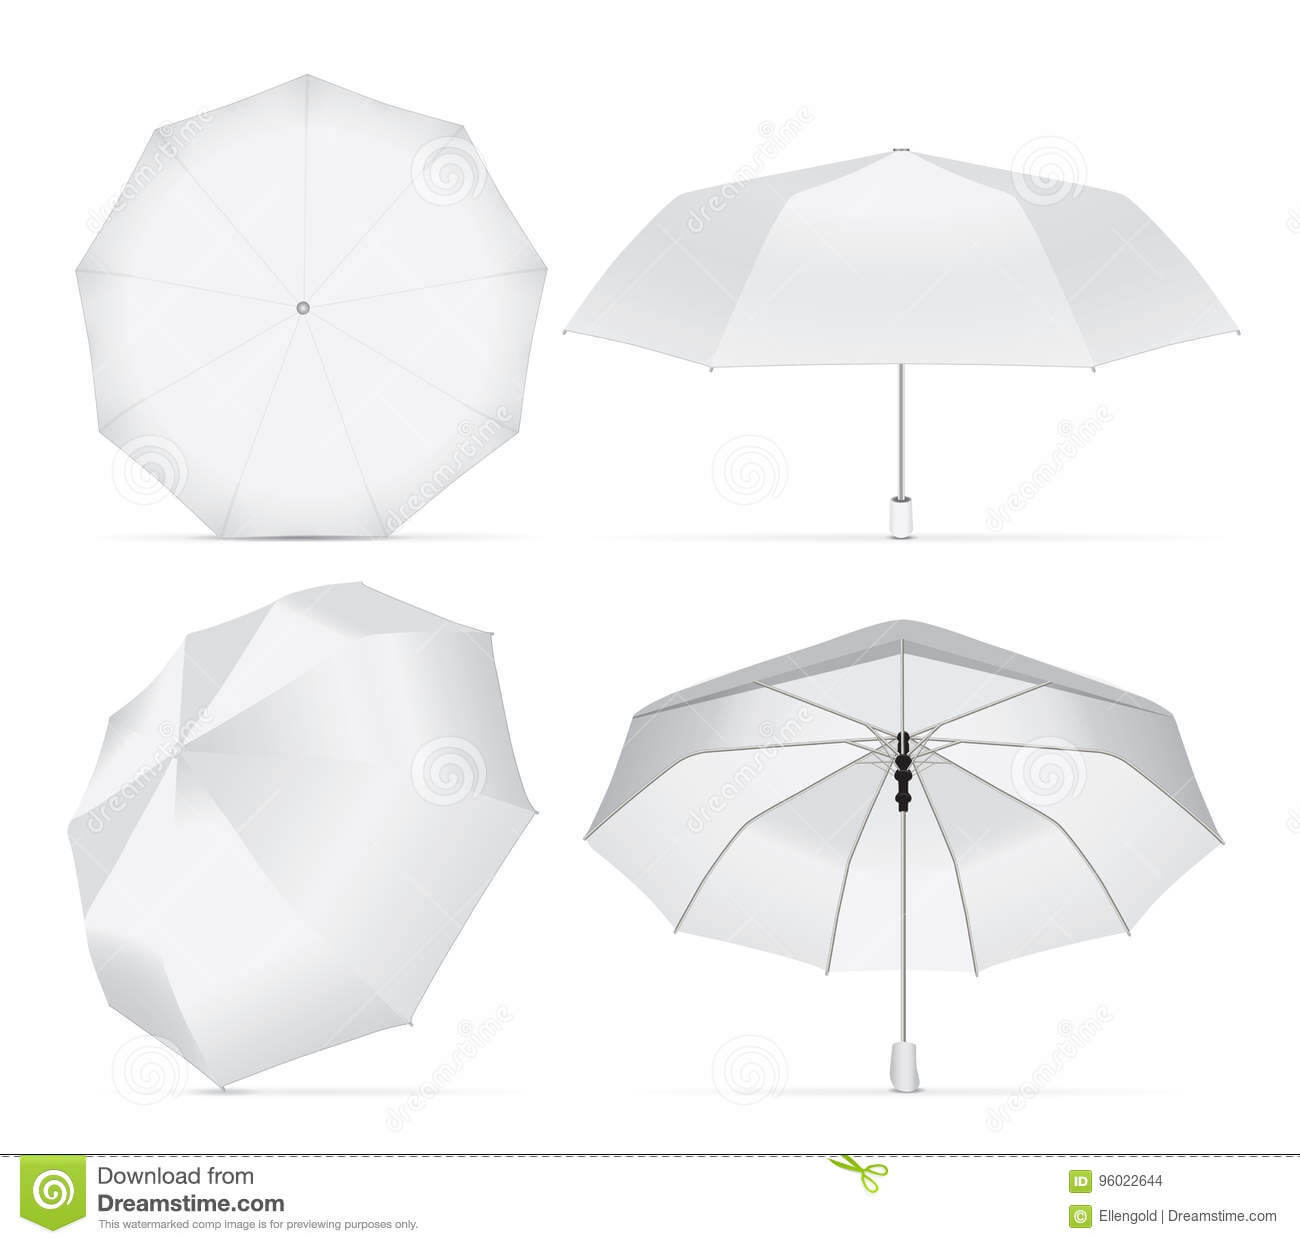 Umbrella For Your Design And Logo. Stock Vector With Blank Umbrella Template